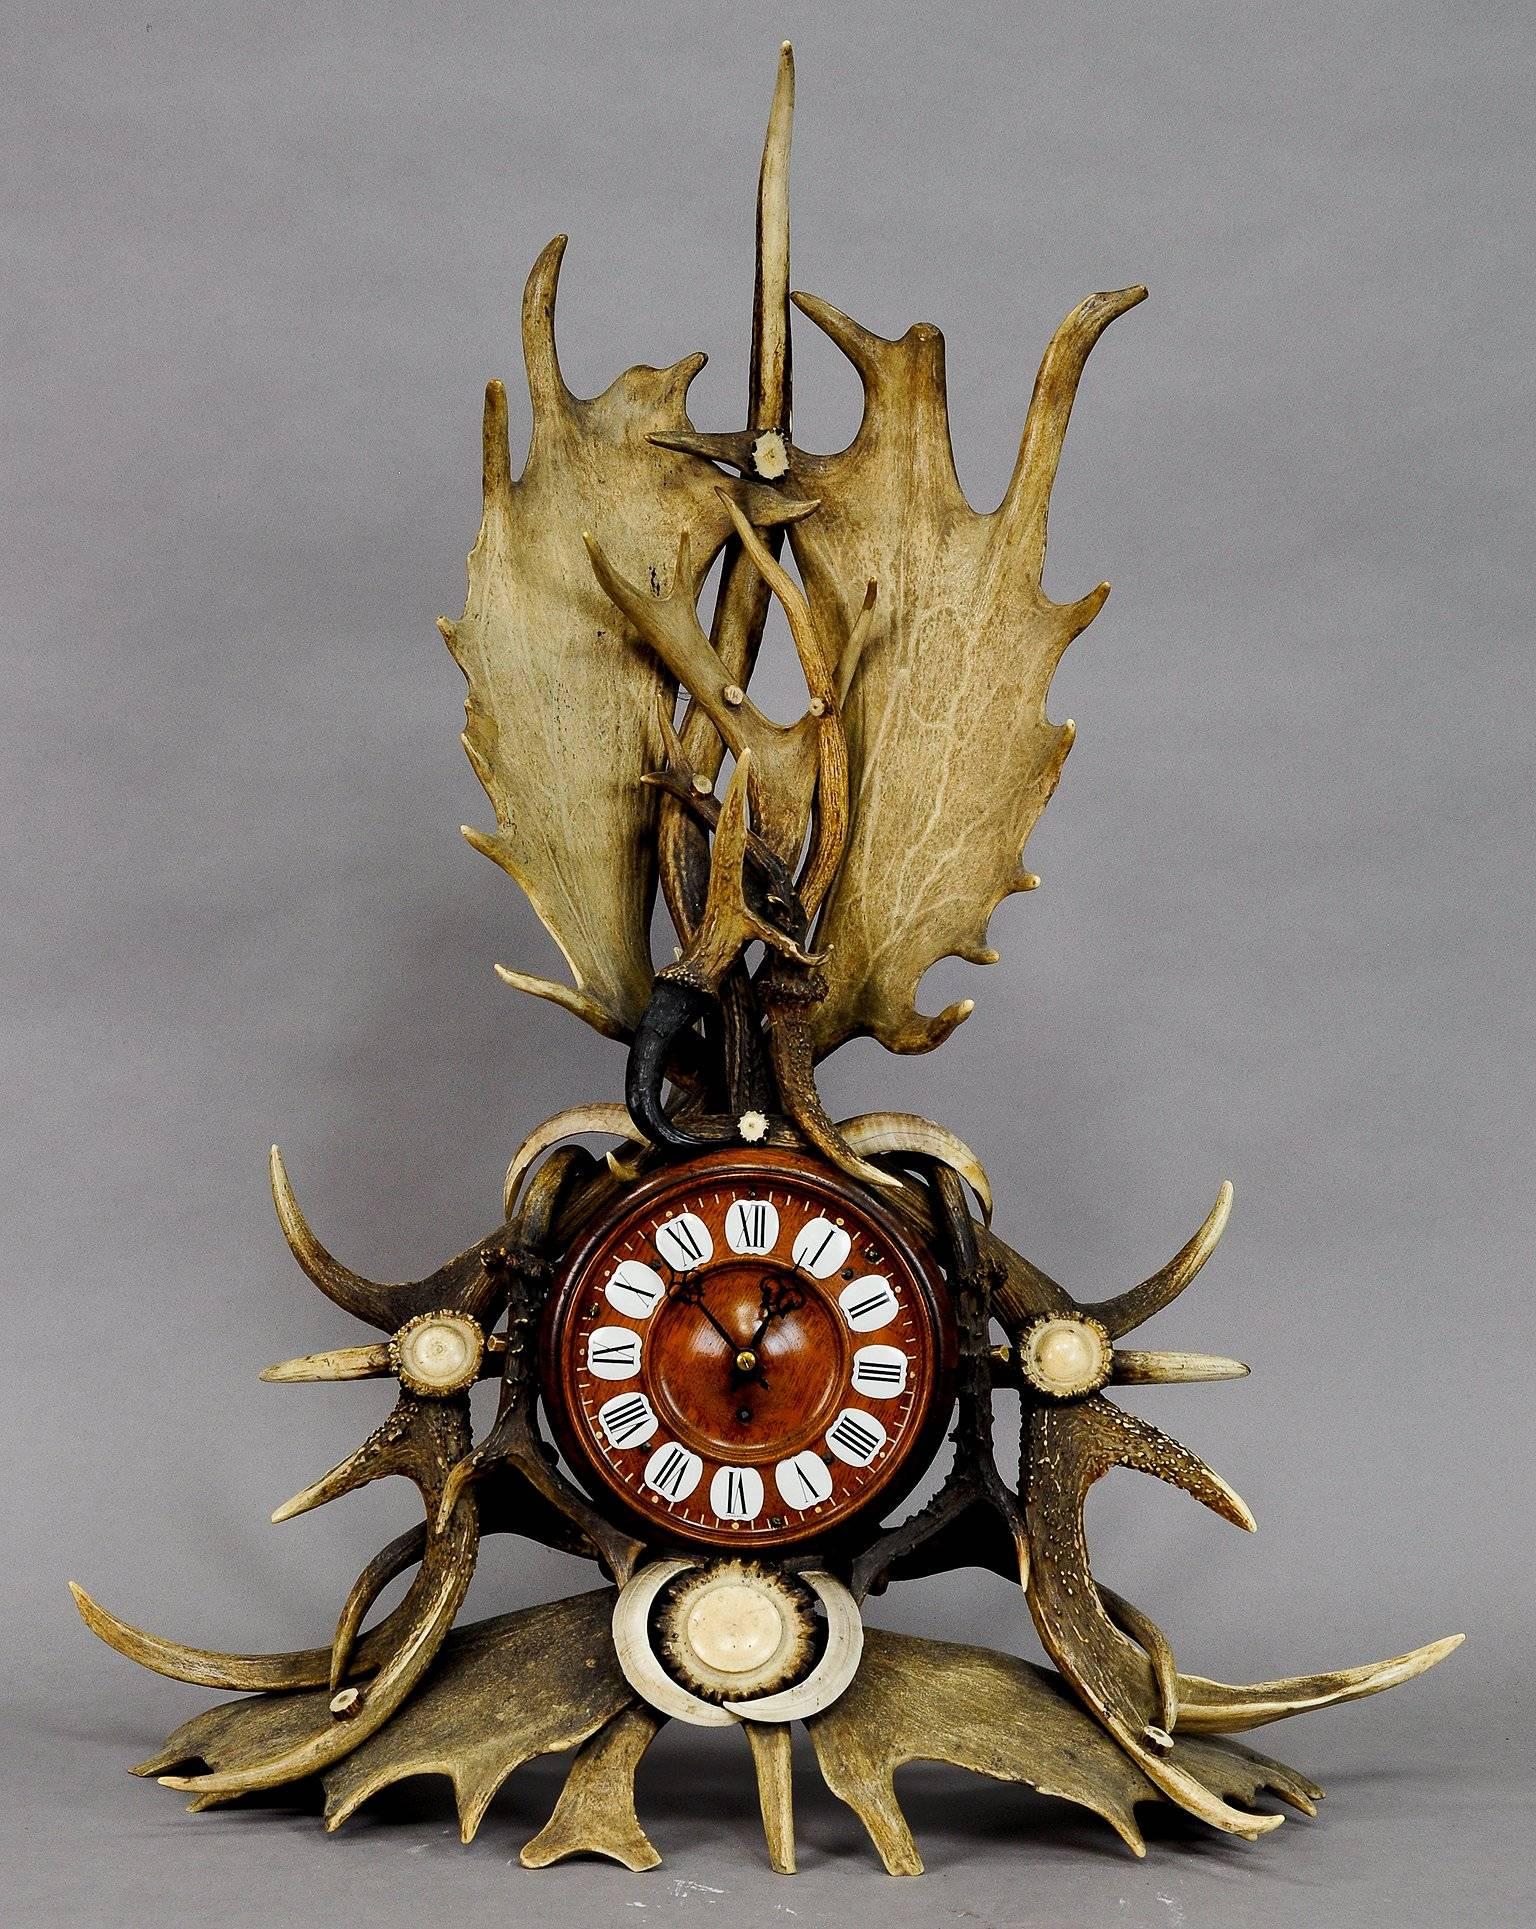 A rare antique lodge style mantel clock oakwood case, richly decorated with antlers from the deer and fallow deer, mountain goat horns and wildboar tusks. 8-day clockwork in working order, revised by a clockmaker. Executed circa 1900.